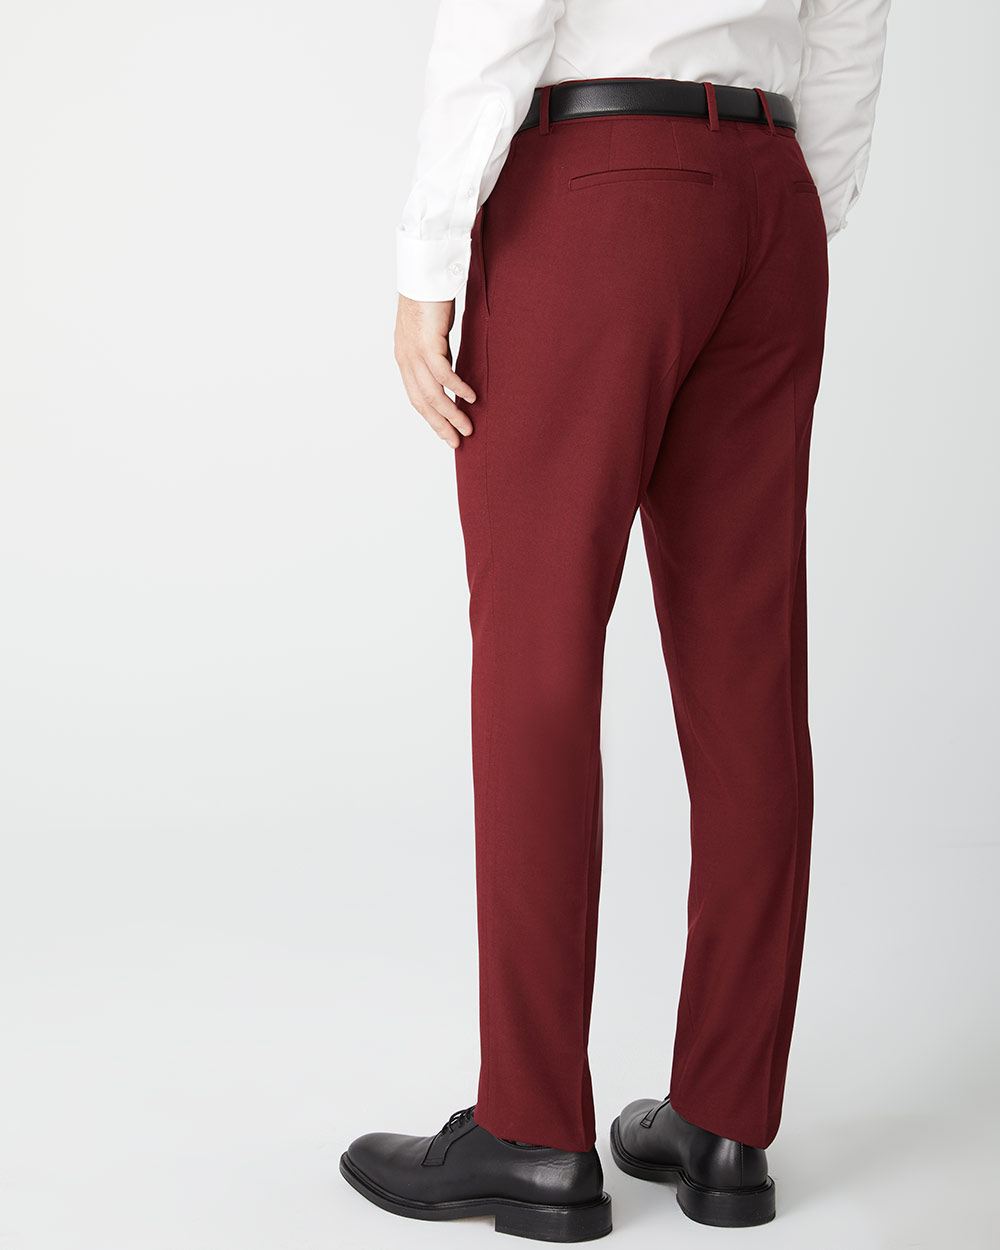 Slim Fit Marsala Red suit pant | RW&CO.